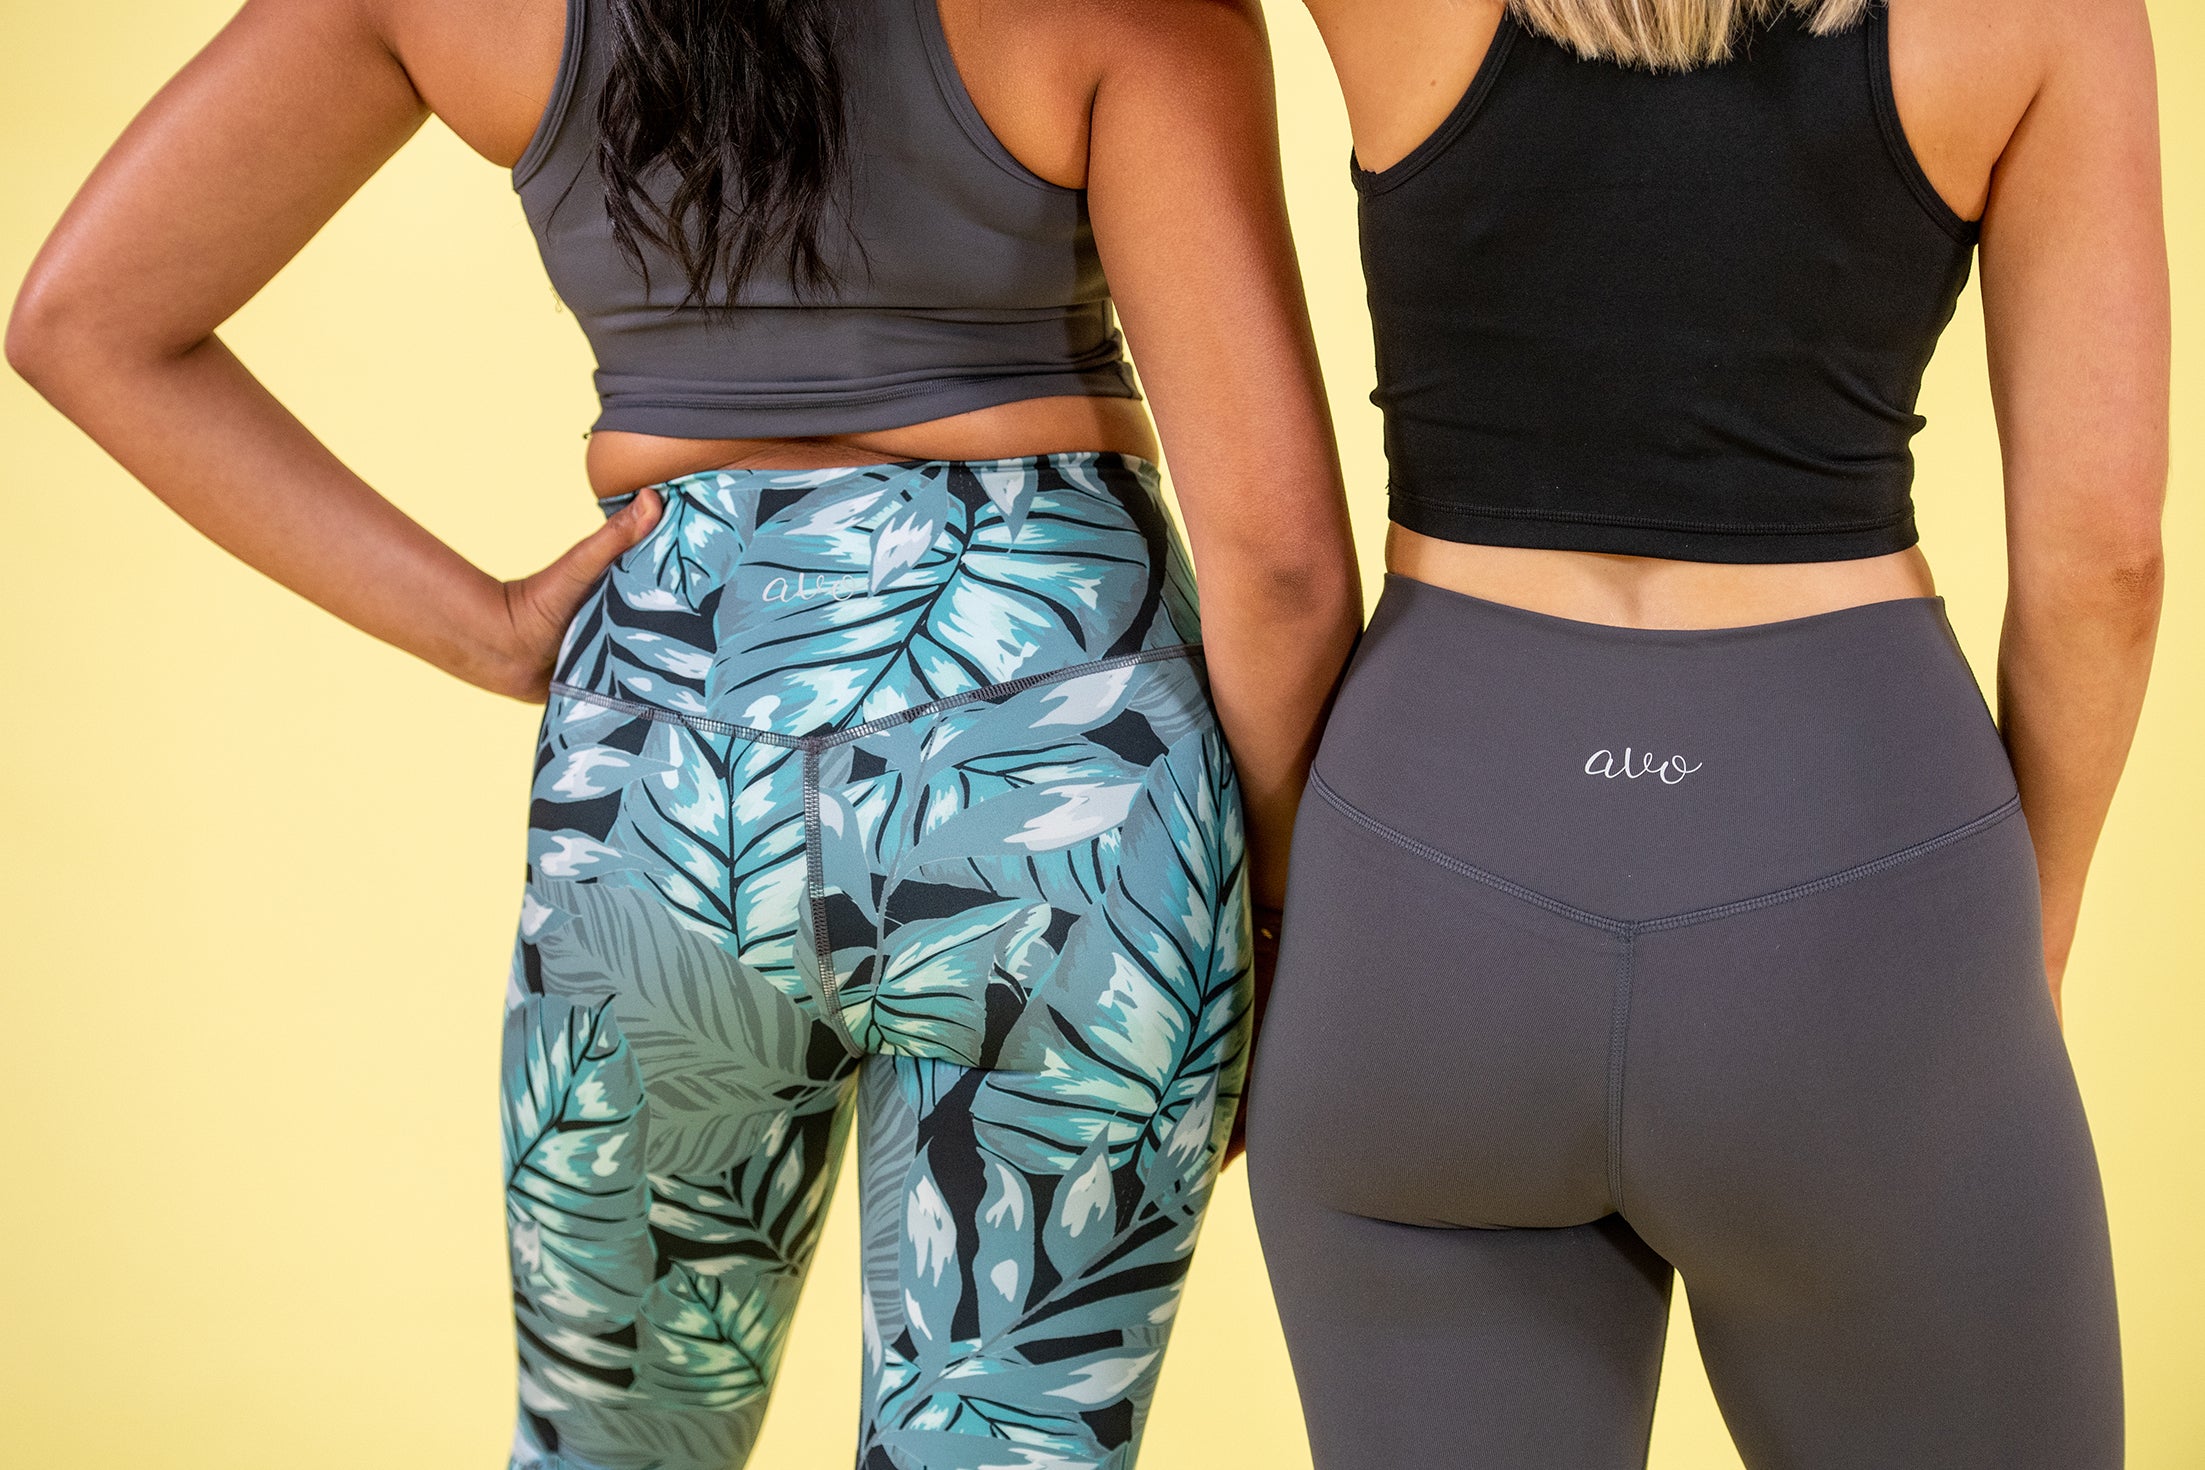 Petite 7/8th Alloy Legging in Eclipse – Pace Active